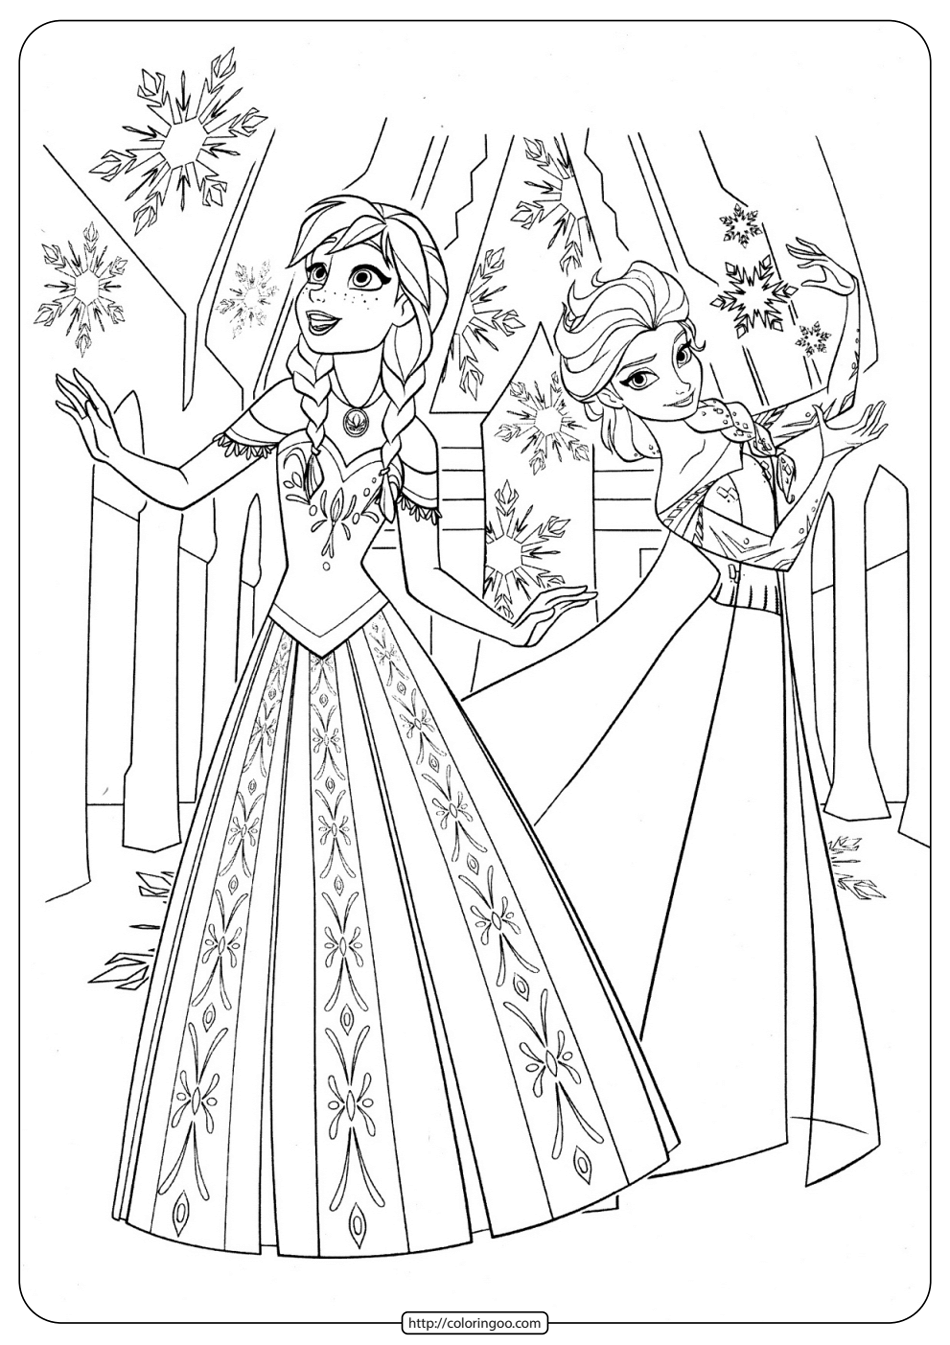 Disney Frozen Anna and Elsa Coloring Page